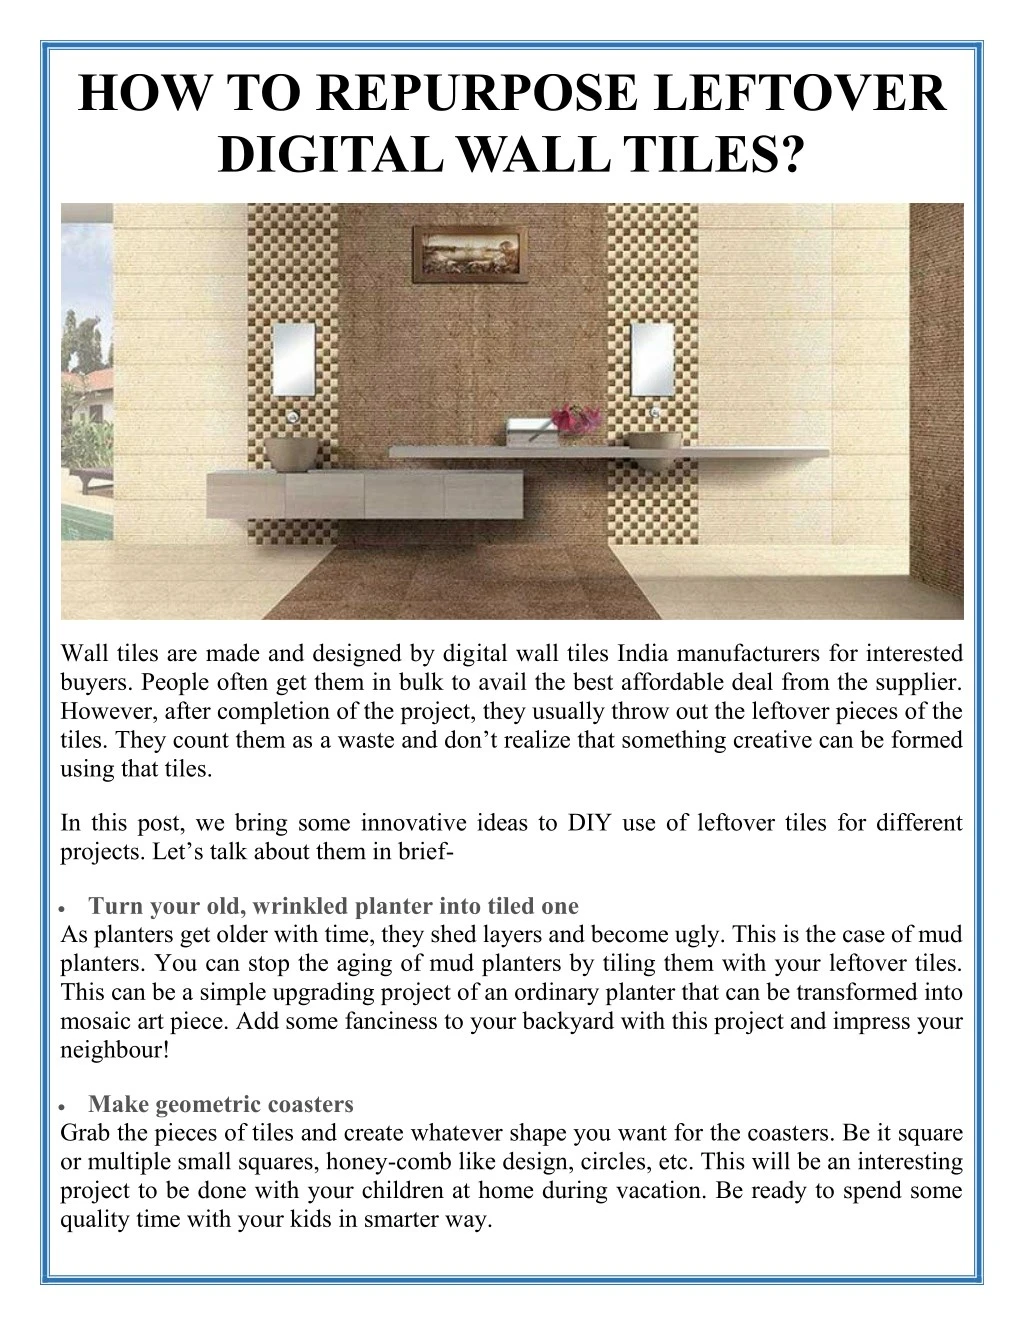 how to repurpose leftover digital wall tiles